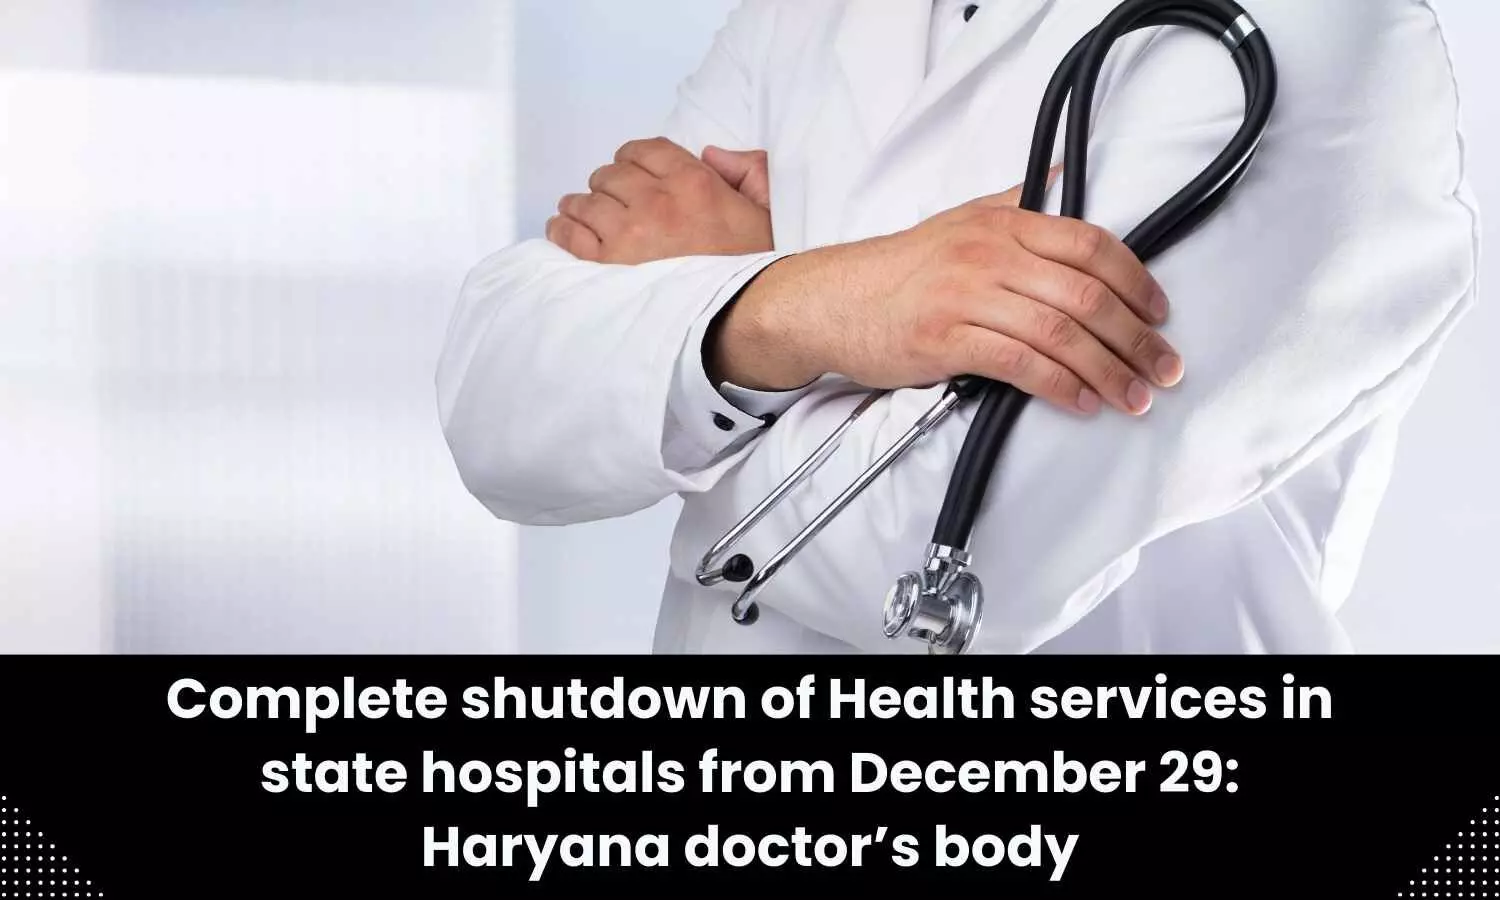 State hospitals to face complete shutdown of Health services from December 29, says Haryana doctor’s body